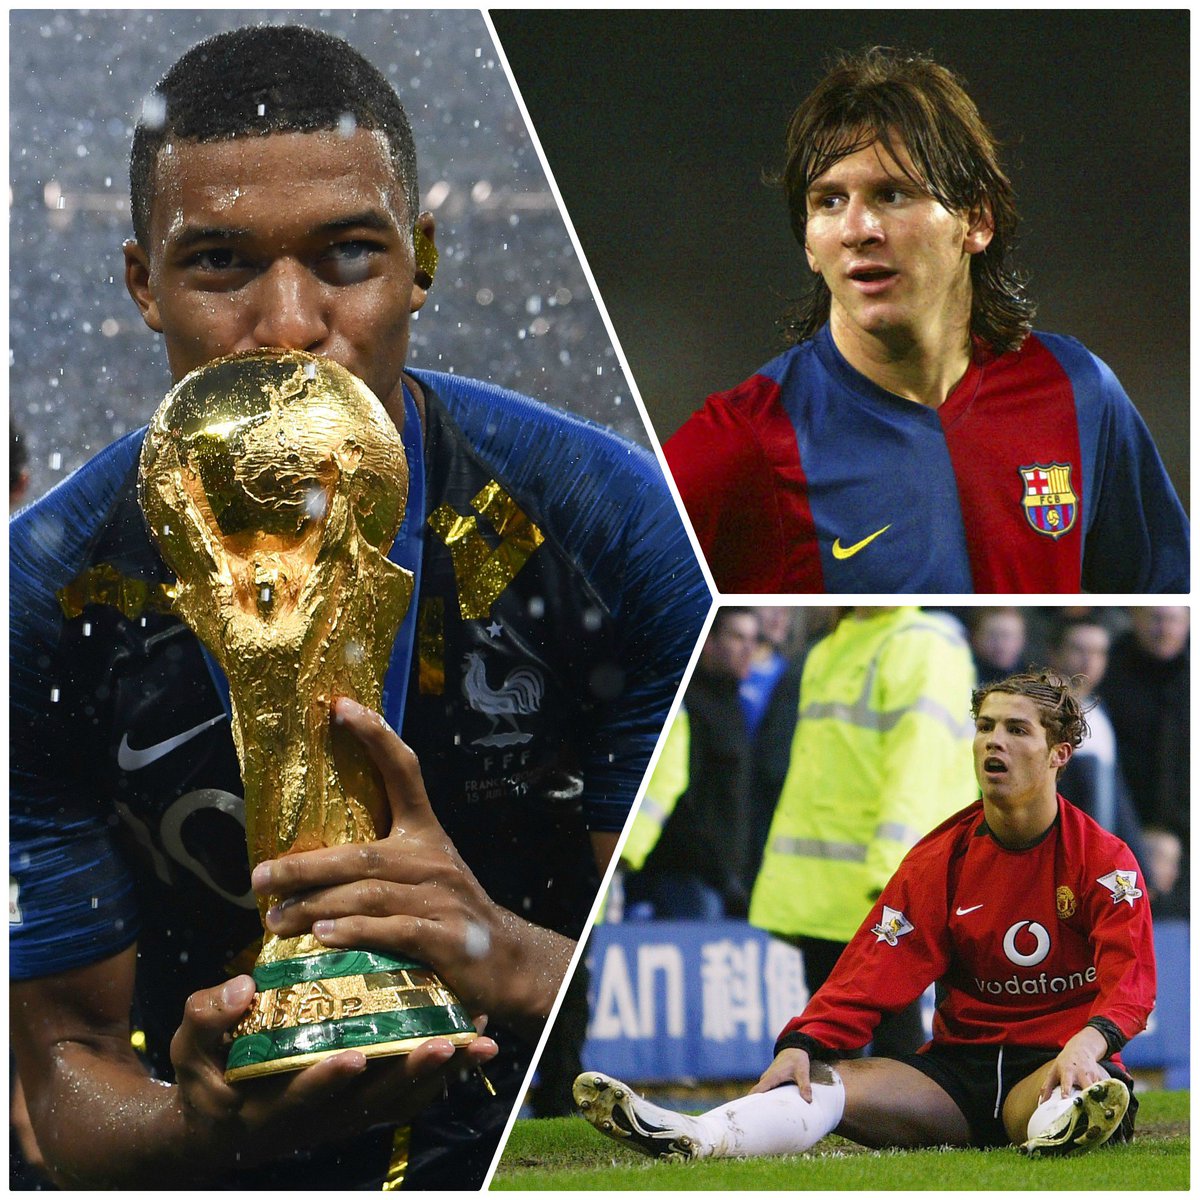 Optajean On Twitter 20 Kylian Mbappe V Lionel Messi Cristiano Ronaldo At 20 Years Old Club All Comps Country Mbappe 150 Games 73 Goals Messi